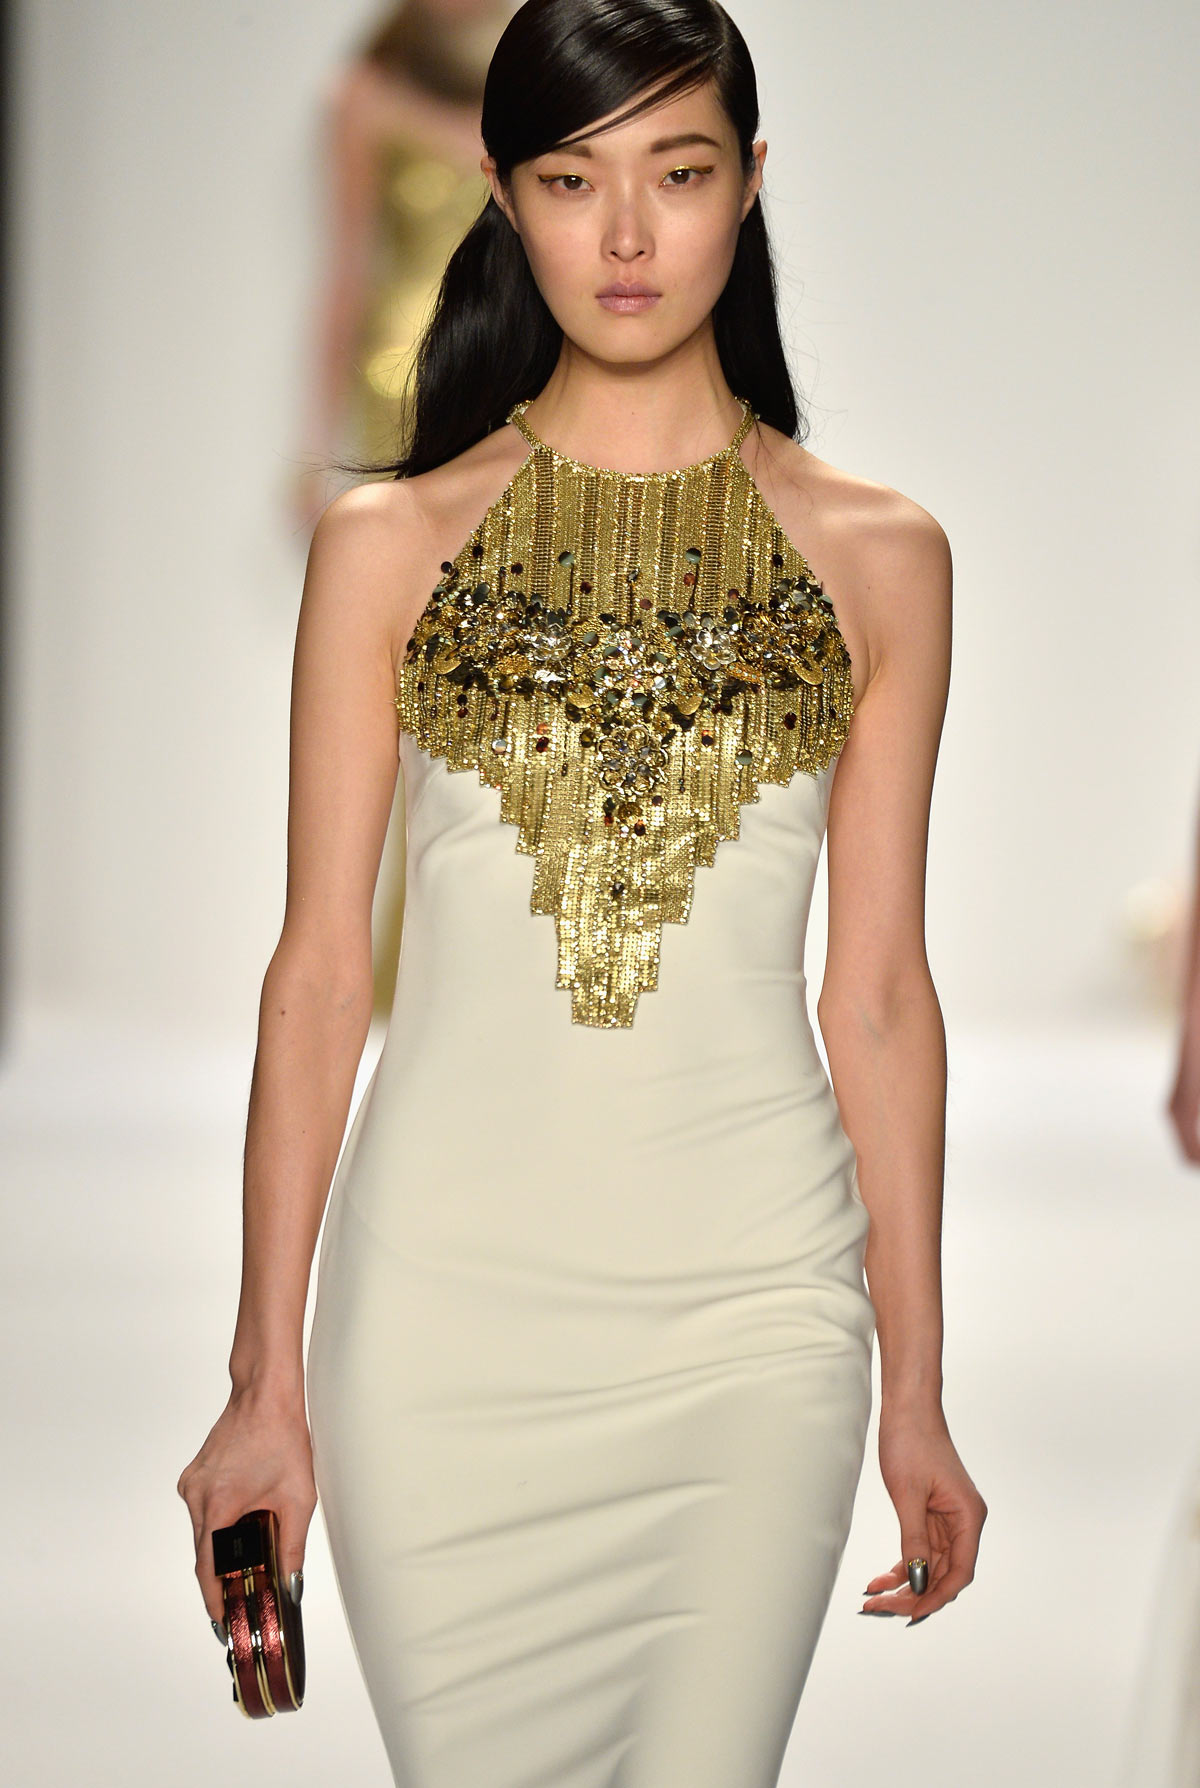 A model walks the runway at the Badgley Mischka fashion show during Mercedes-Benz Fashion Week Fall 2014 at The Theatre at Lincoln Center on February 11, 2014 in New York City.